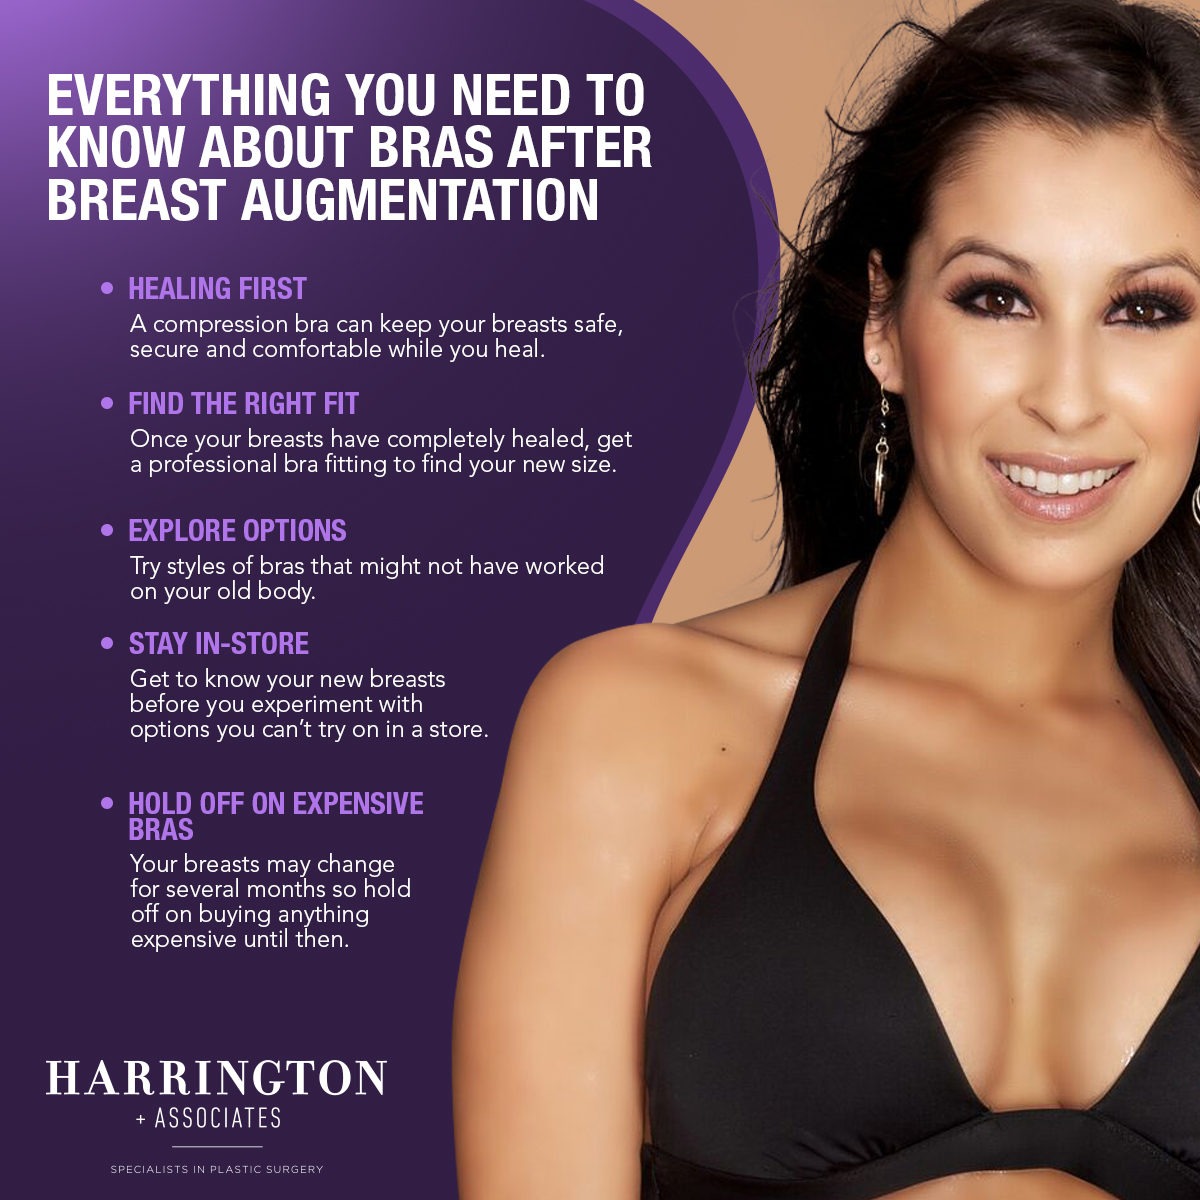 What Is the Best Bra After Breast Augmentation?